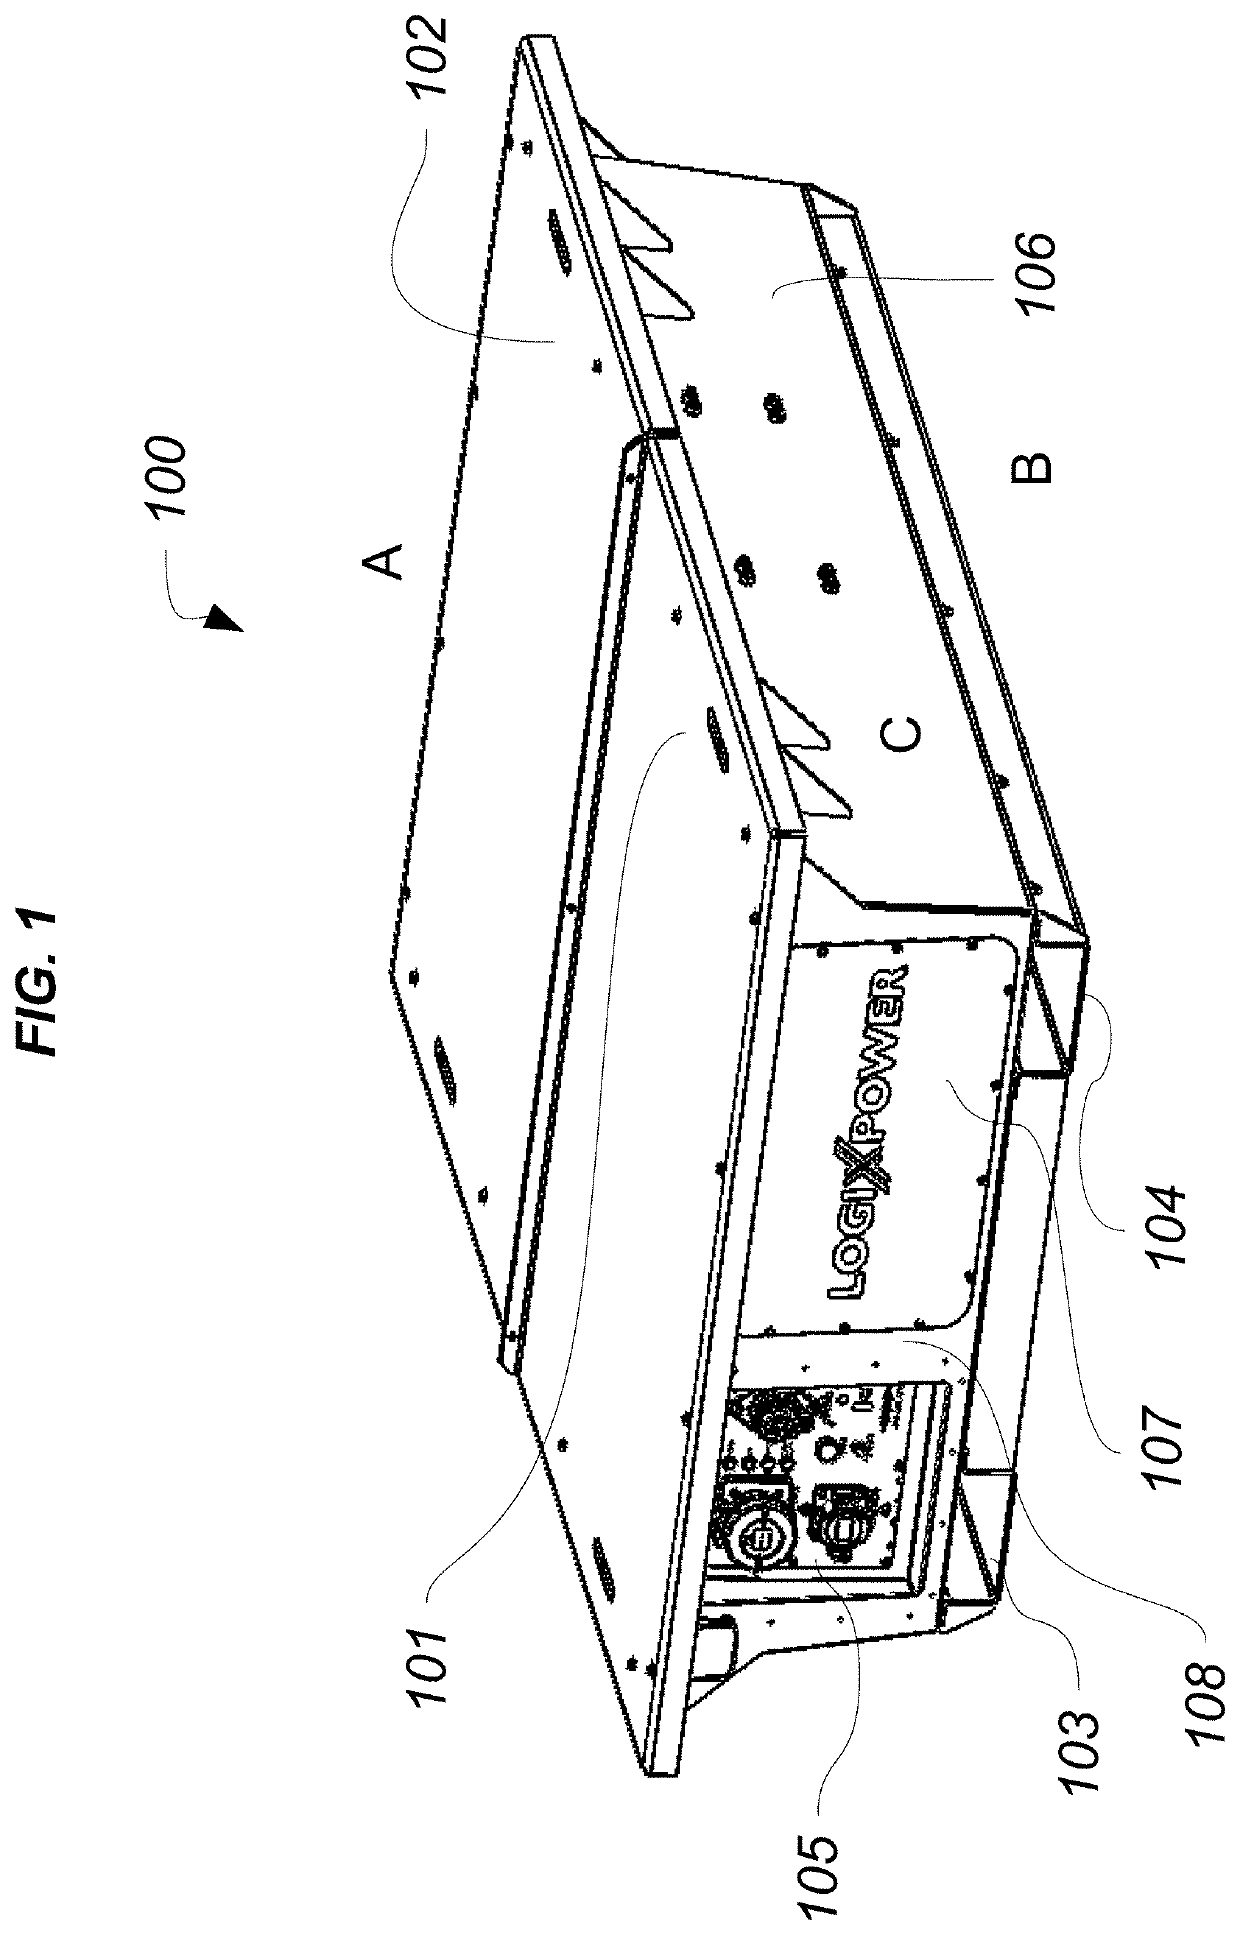 Battery-based system for powering refrigerated transport and other industrial applications